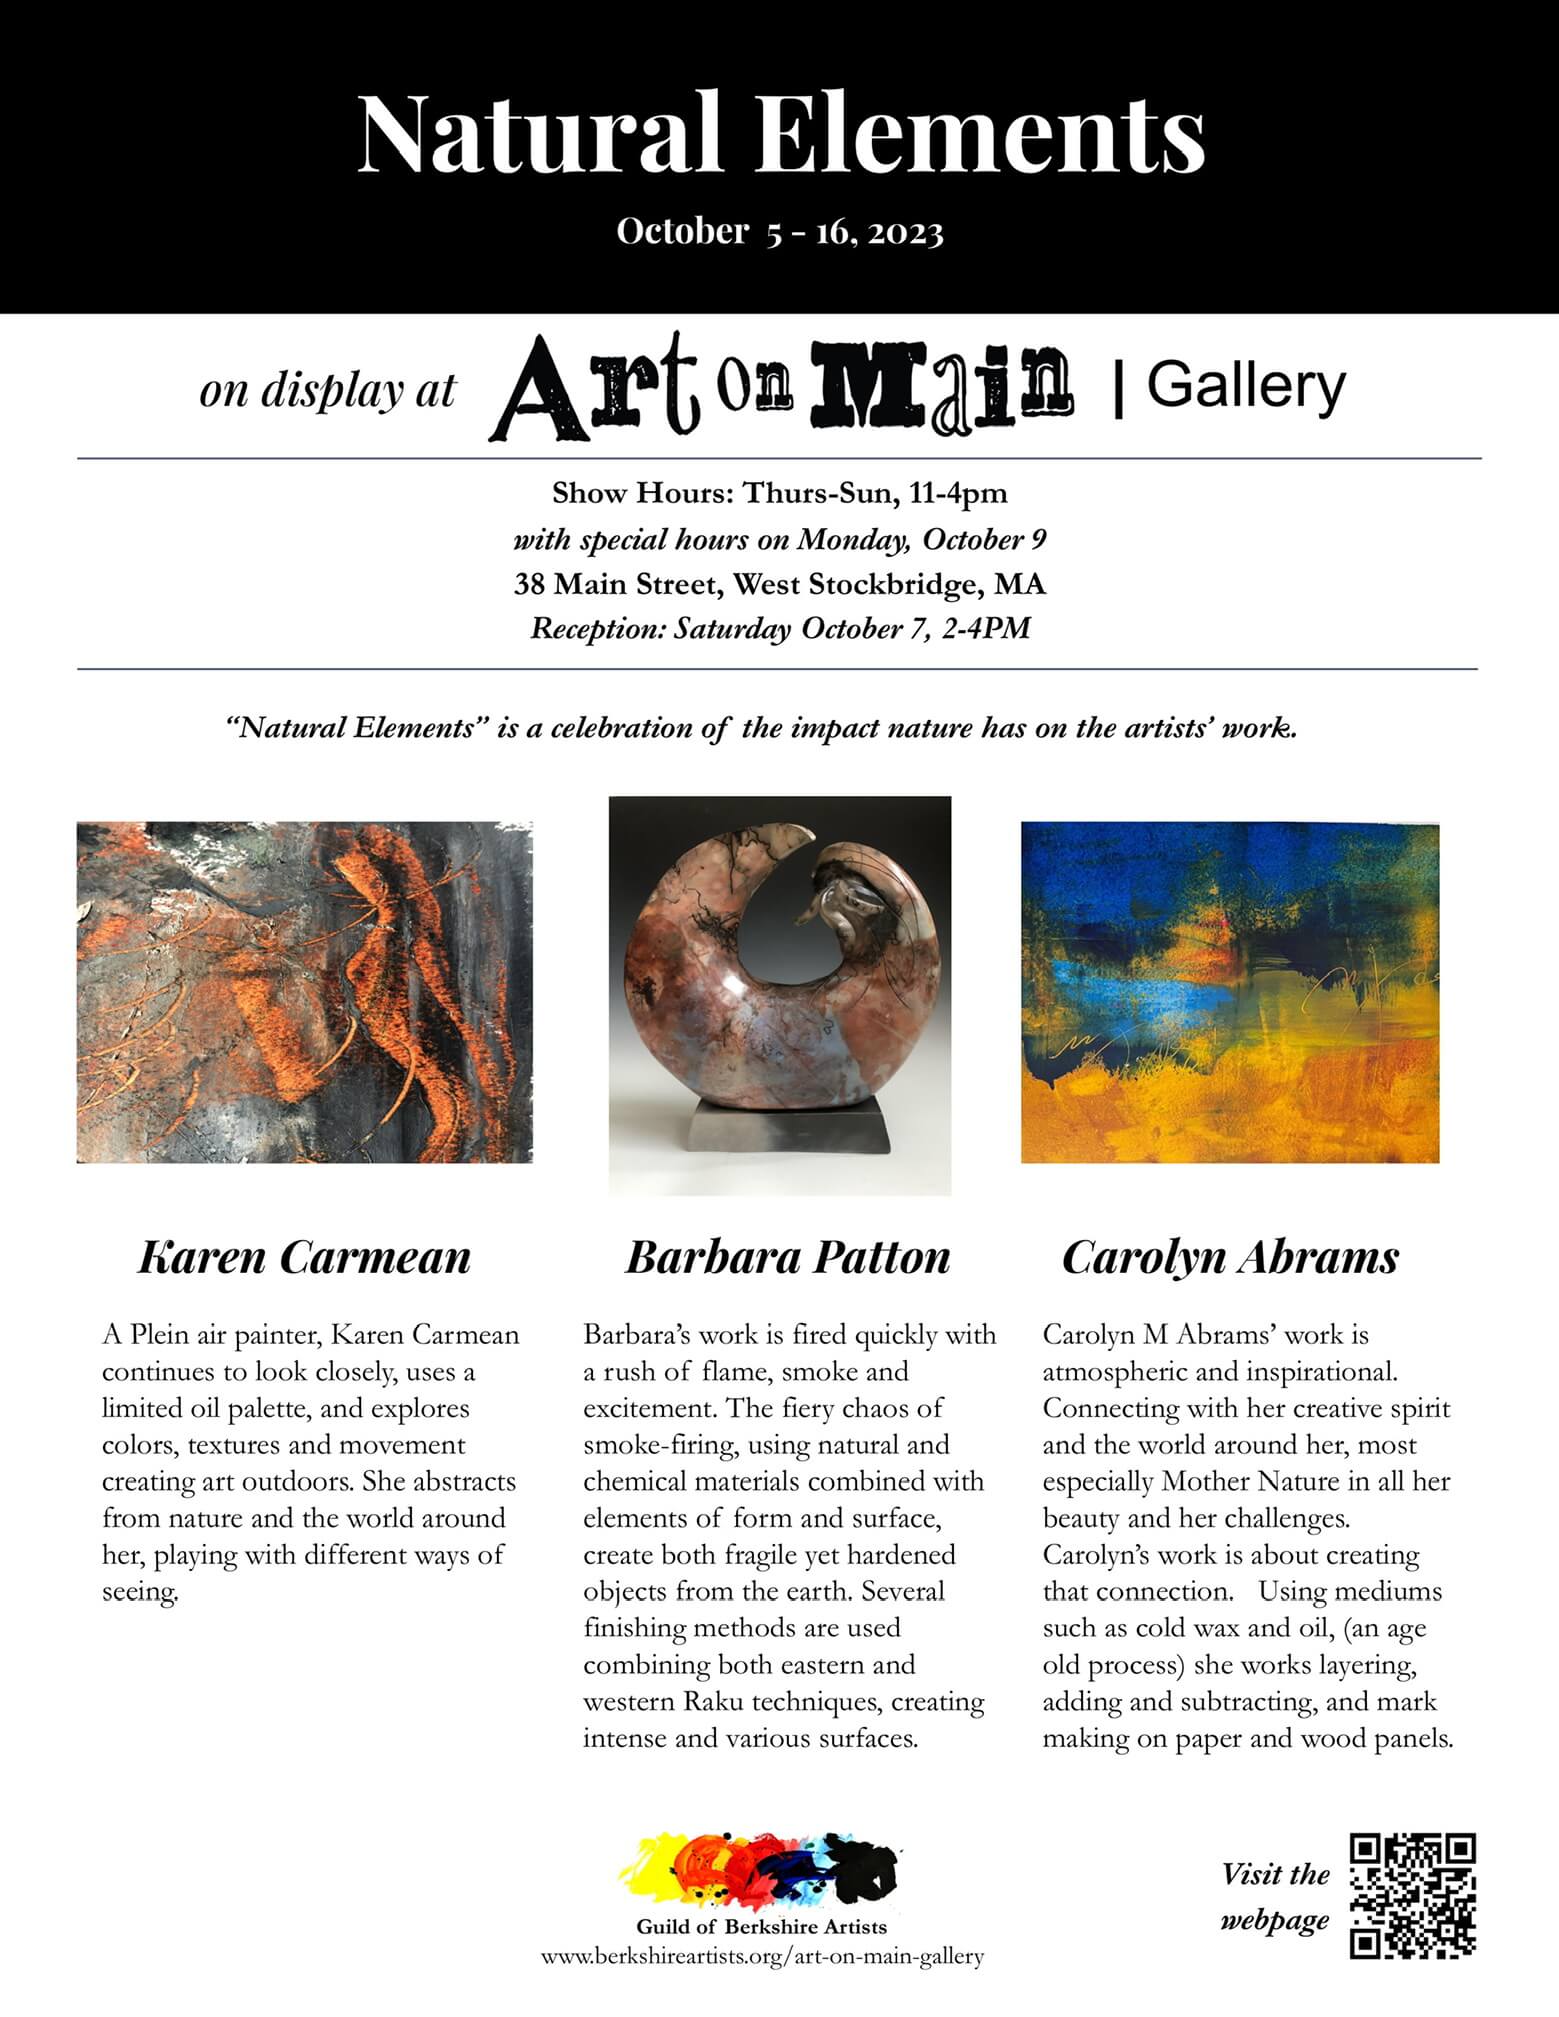 Informational flyer about Art on Main